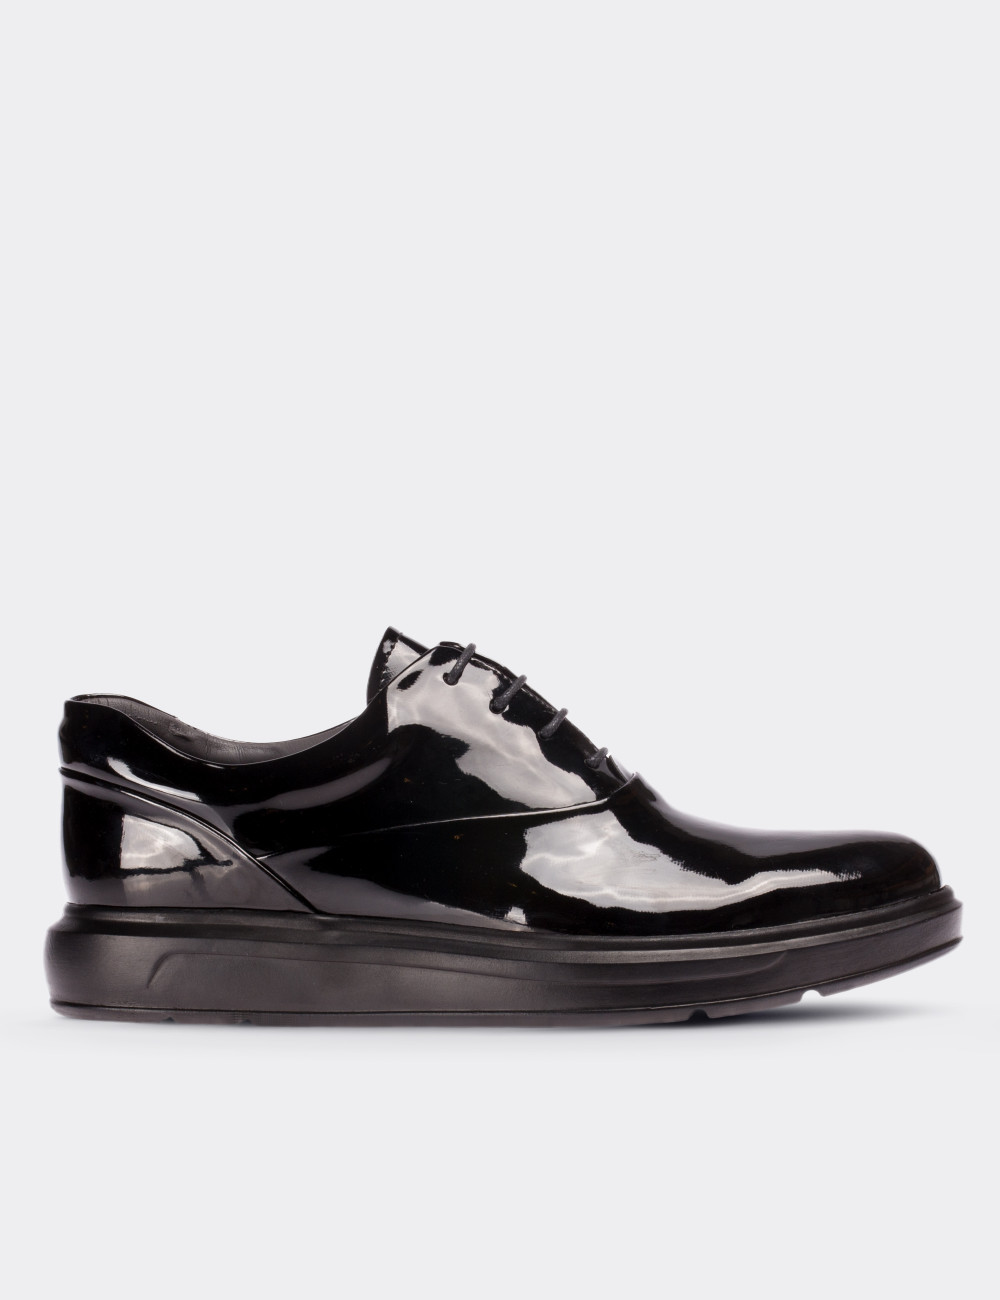 Black Patent Leather Comfort Lace-up Shoes - 01652MSYHP13